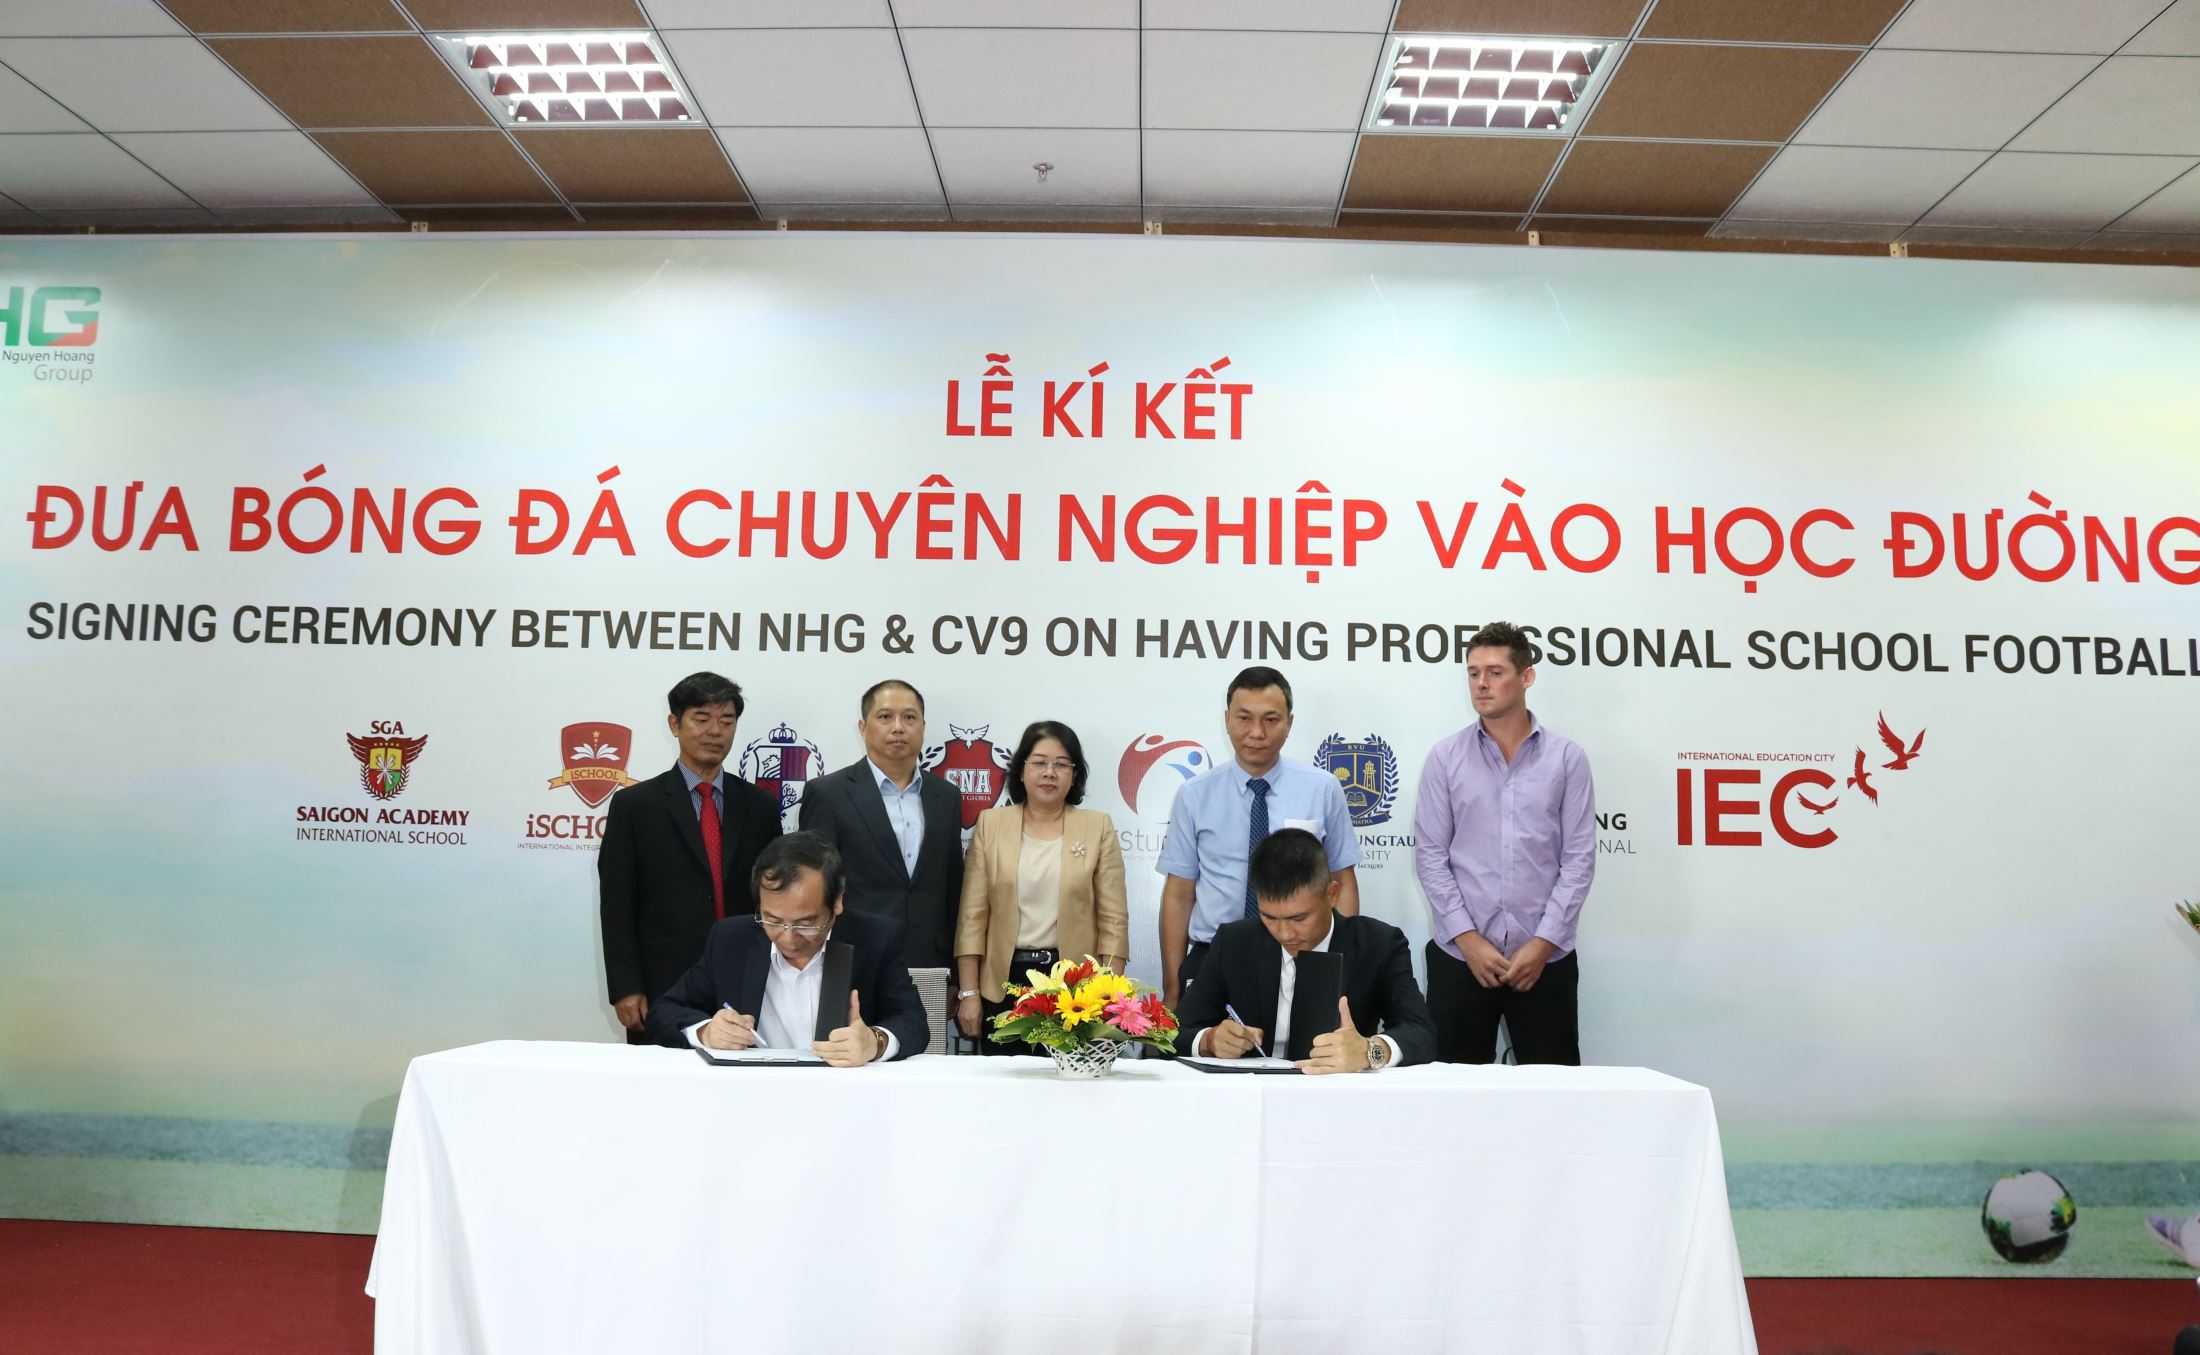 Mr. Le Cong Vinh and Dr. Do Manh Cuong, Permanent Member of Education Council of NHG, sign the agreement to implement the project “bring professional football to school” with the witness of the representatives of VFF and the Ministry of Education and Training, HCMC.